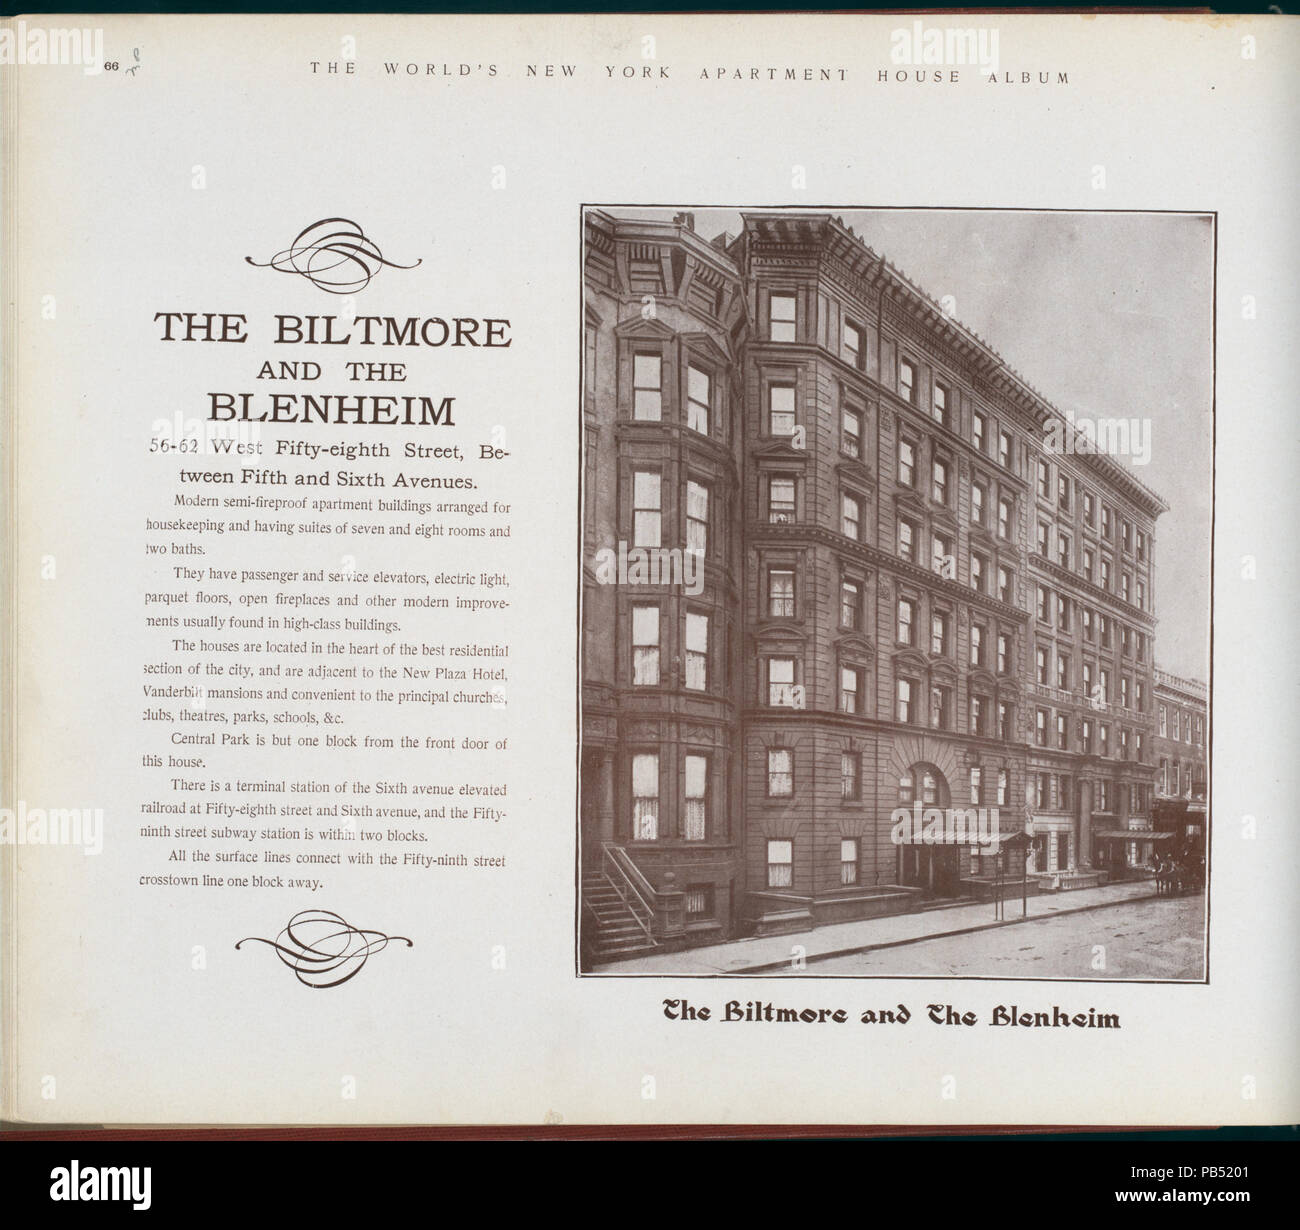 1615 The Biltmore and The Blenheim. 56-62 West Fifty-eighth Street, between Fifth and Sixth avenues (NYPL b11389518-417295) Stock Photo